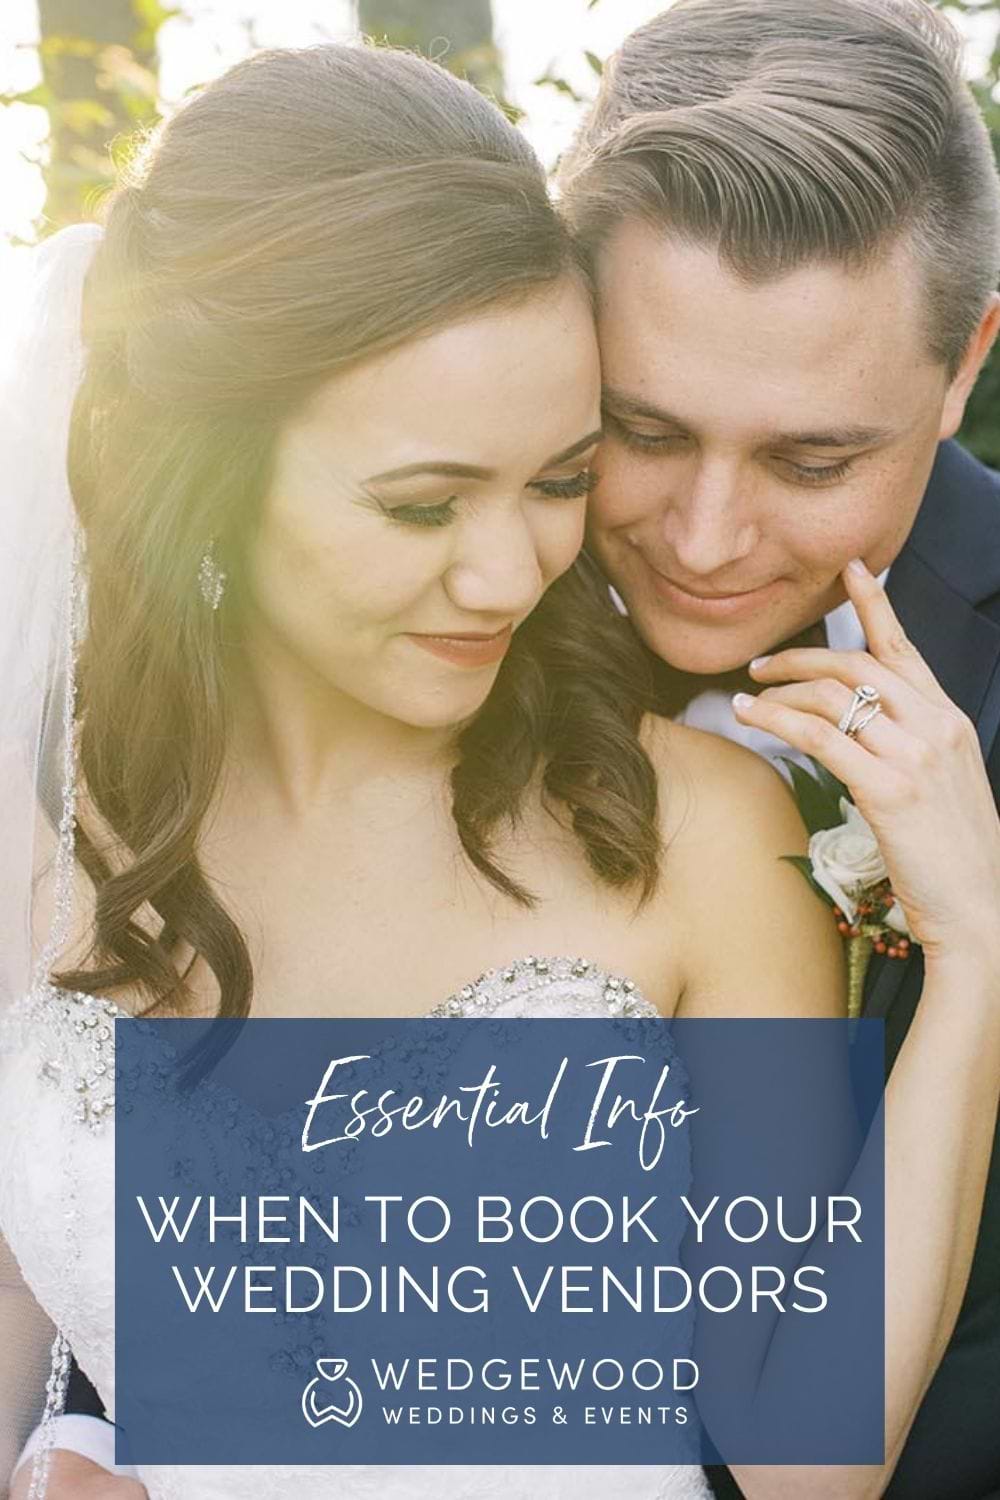 Wedding planning? There's a science to getting the best service, vendor availability, and pricing. A wedding industry pro with 10+ years of experience explains why booking your vendors by THIS date will ensure better availability for your top-choice vendors and an overall awesome wedding planning experience. 